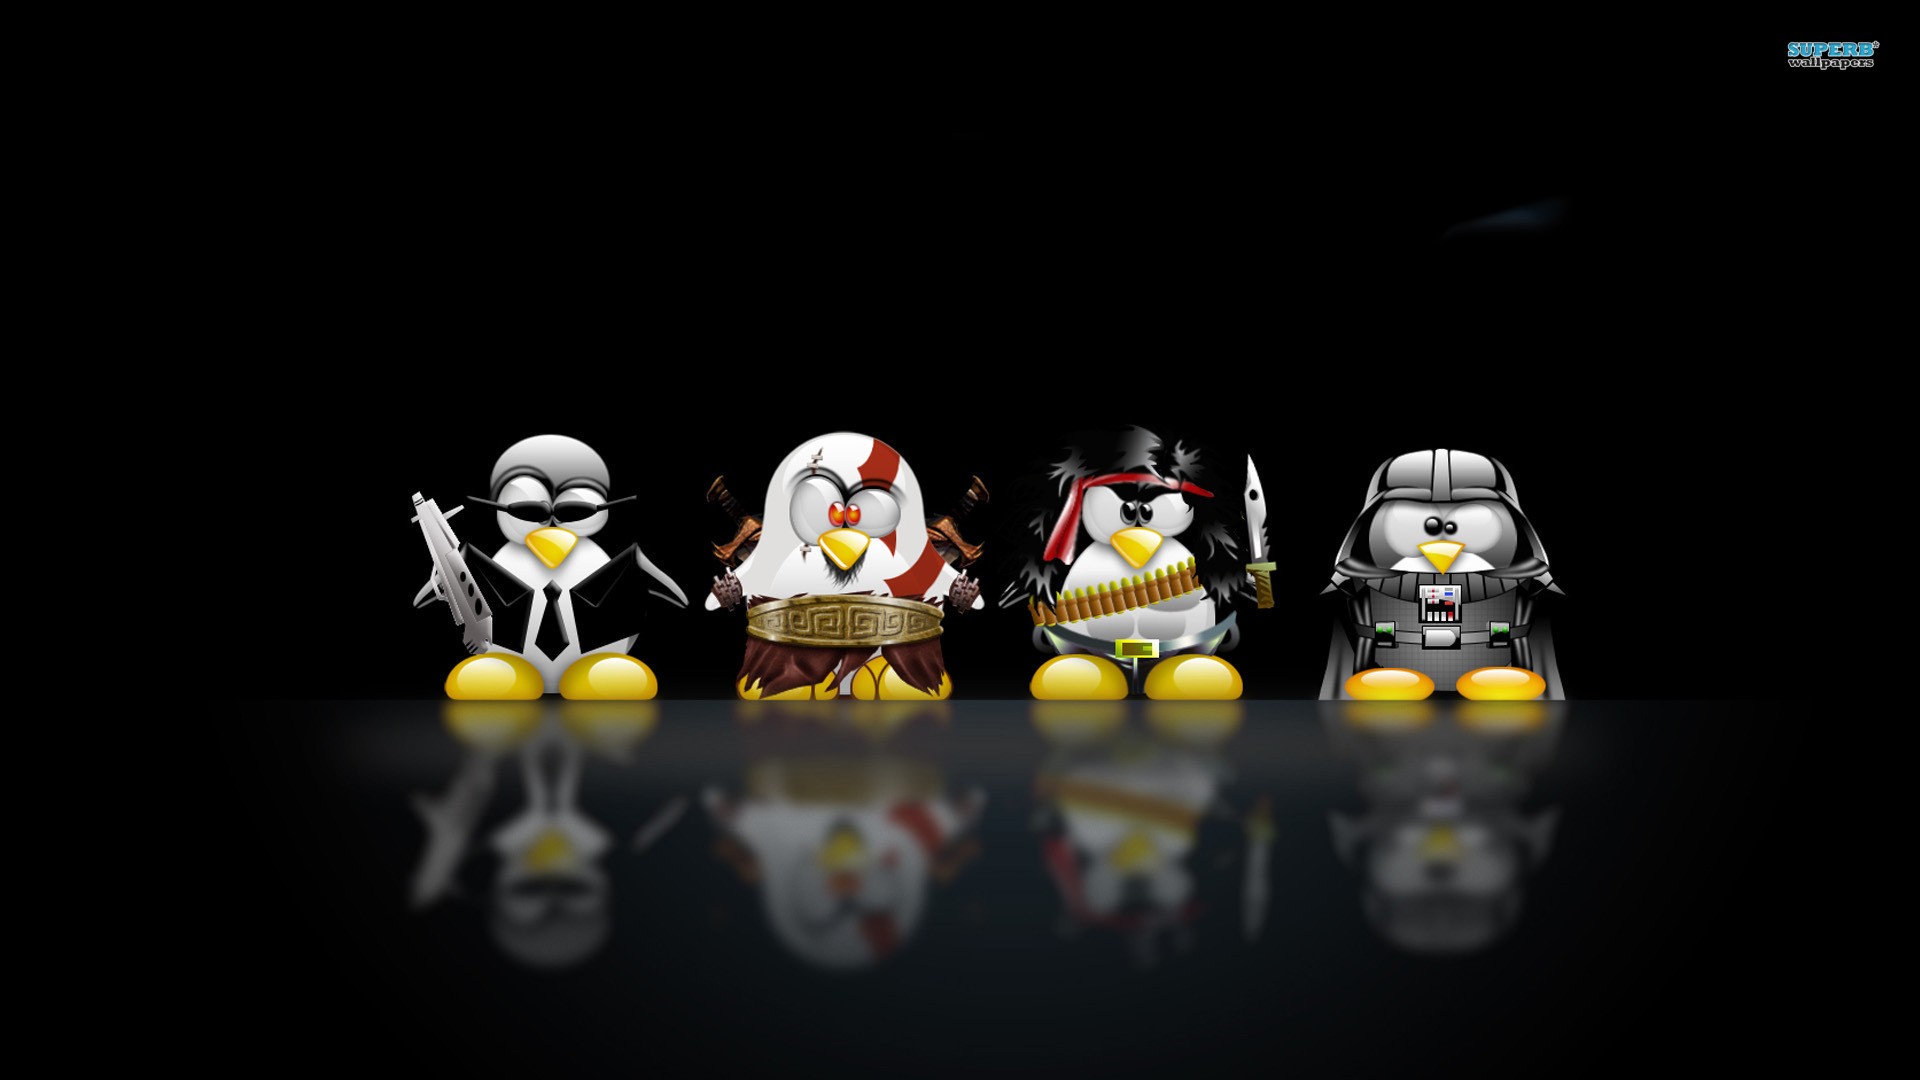 General 1920x1080 Linux Tux Darth Vader Kratos John Rambo penguins animals birds reflection humor black background simple background video game characters movie characters